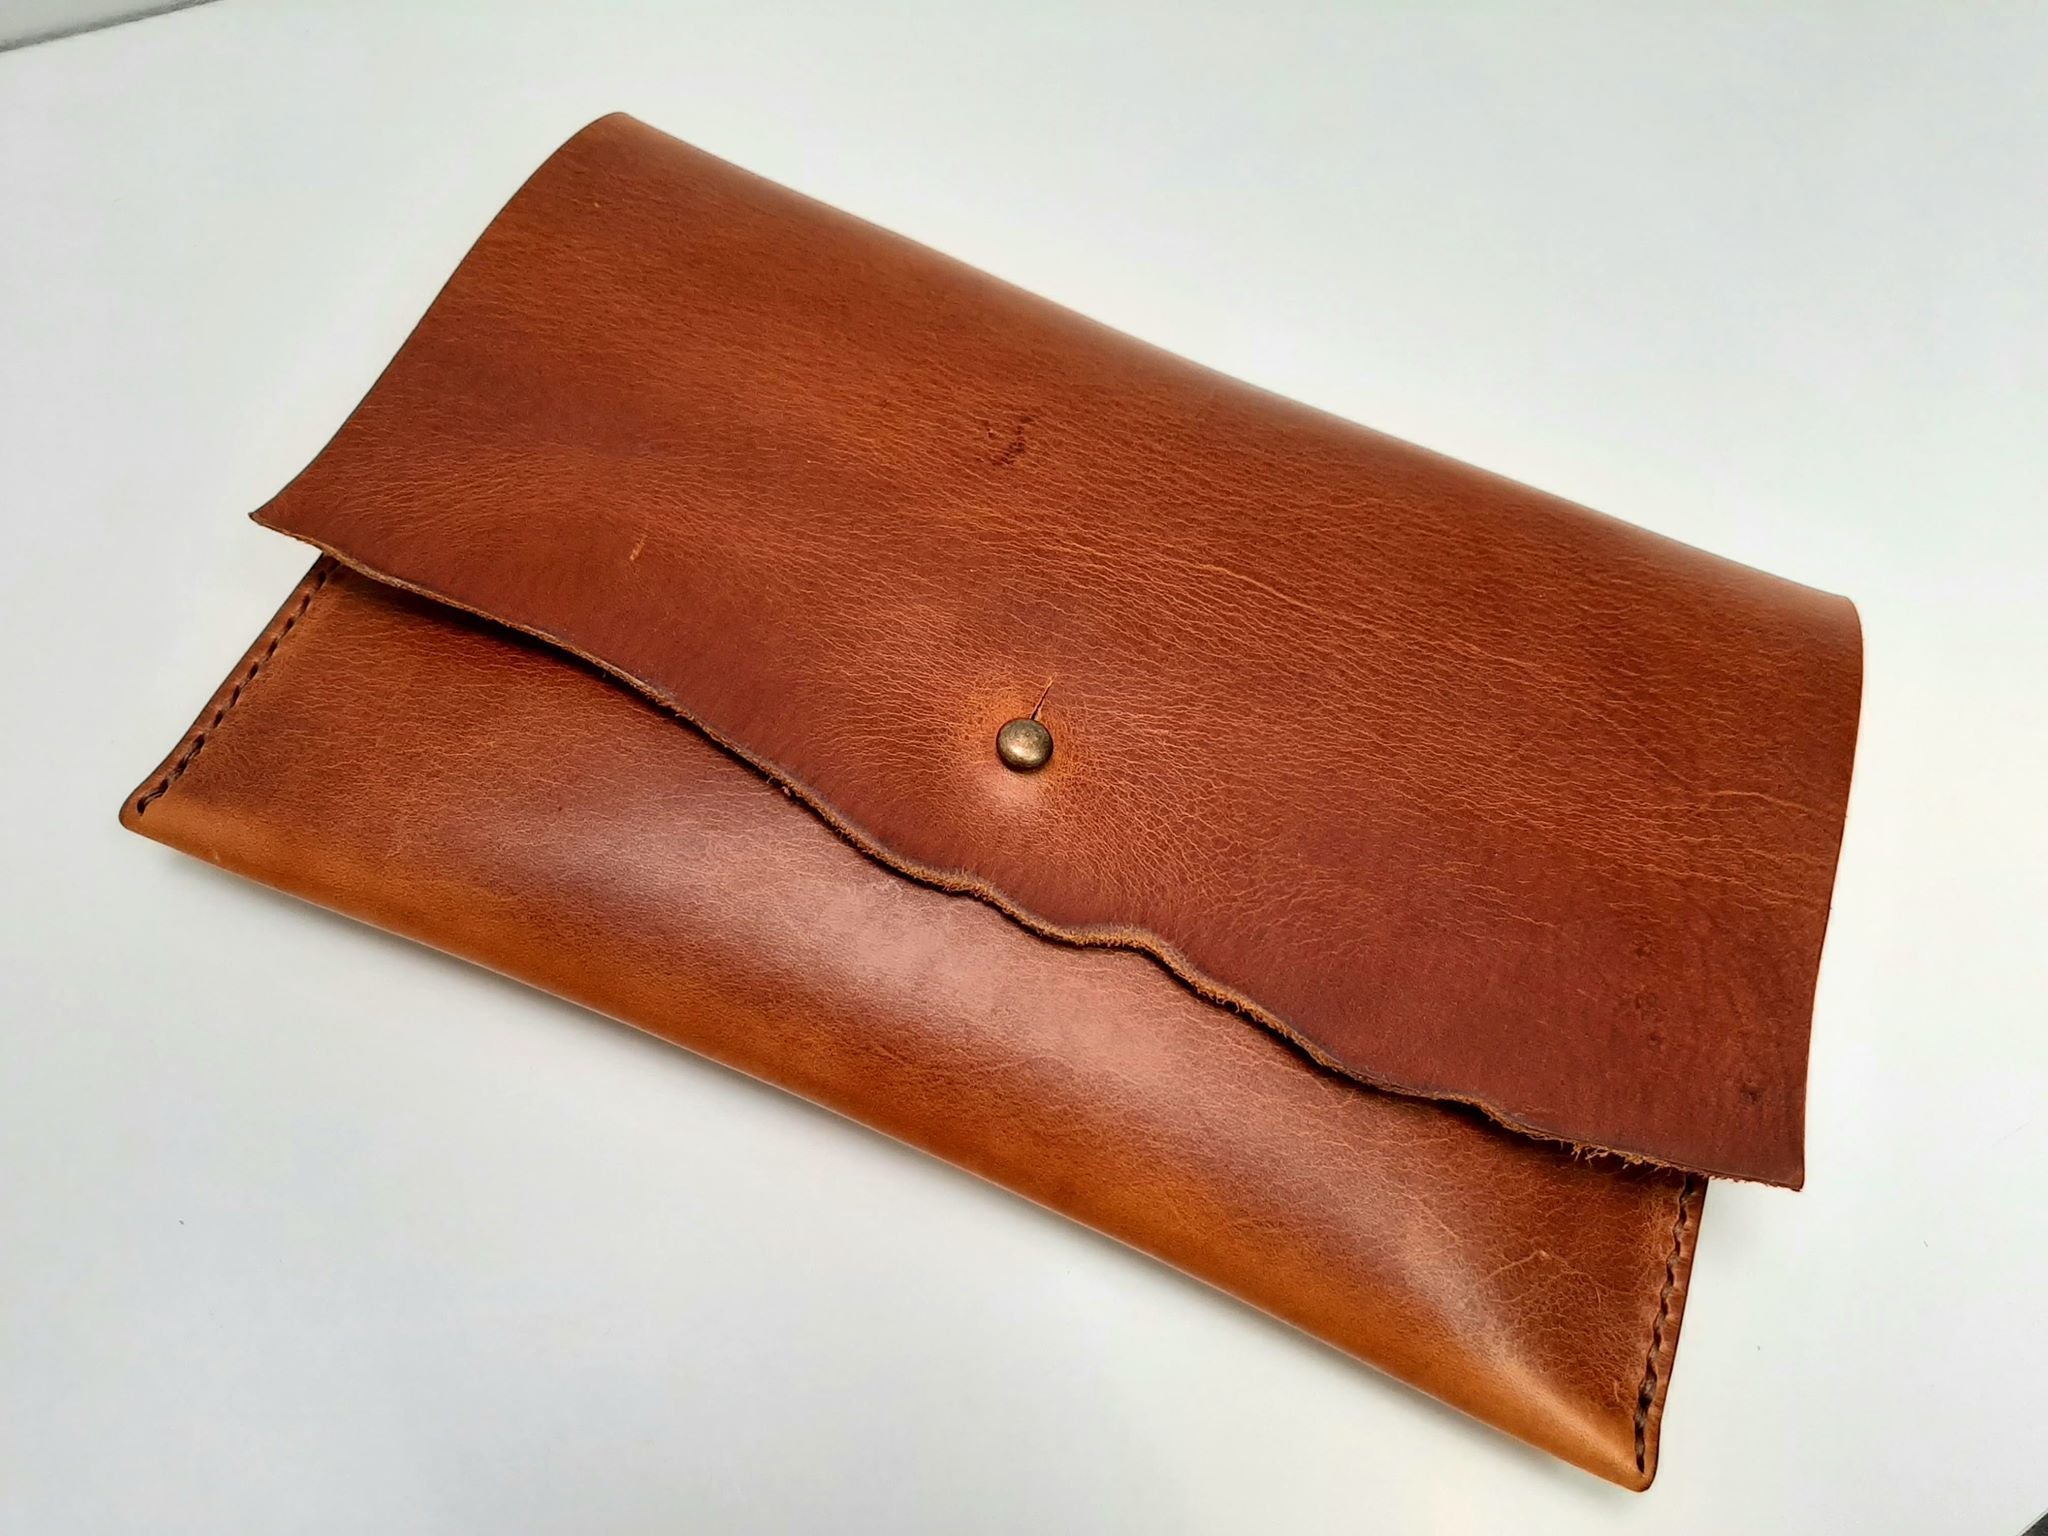 Buy Small Clutch Purses for Women, Crossbody Bags, Leather Shoulder Purses,  Credit Card Holder, Cash/Card Organizer Wallet Purse, Brown at Amazon.in